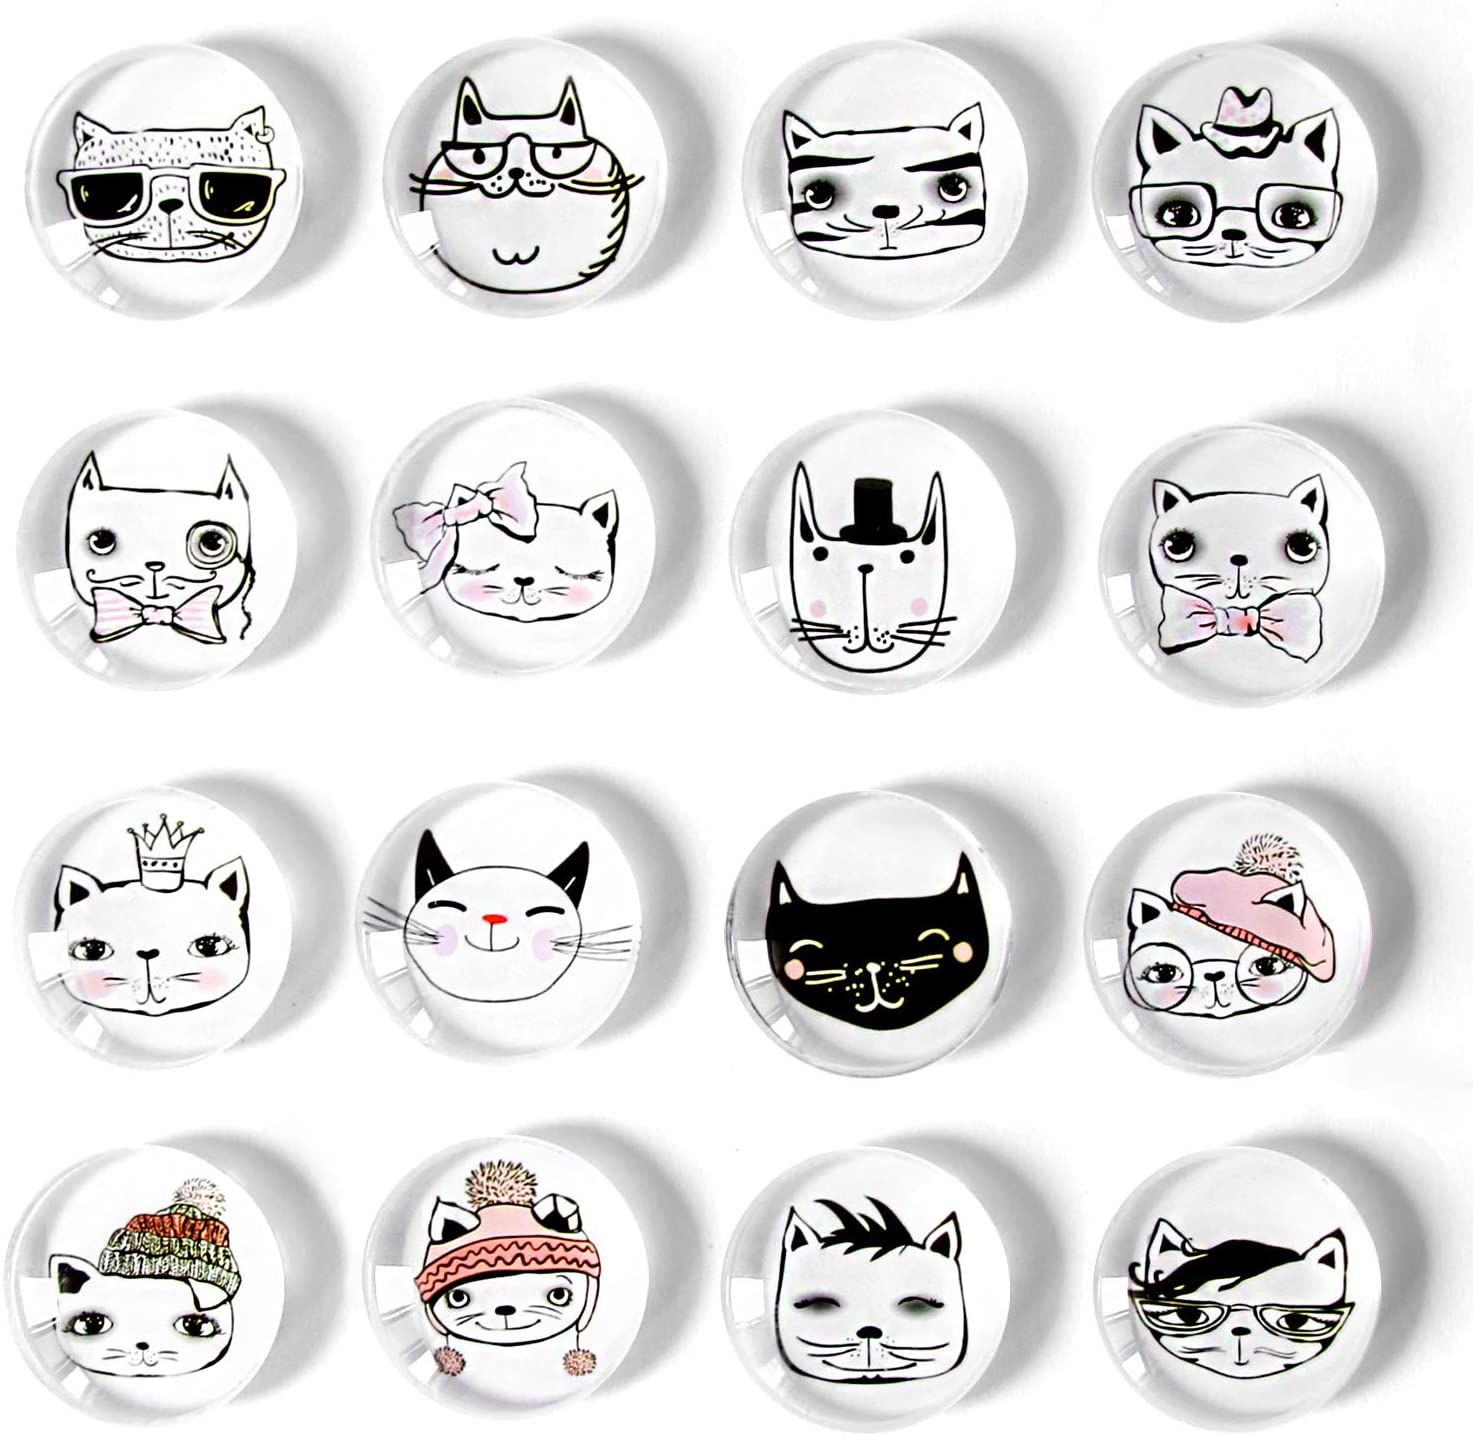 Cosylove 16pcs Cute Cat Refrigerator Magnets, Crystal Glass Fridge Magnets for Office Cabinets, Whiteboards, Photos, Decorative Magnets